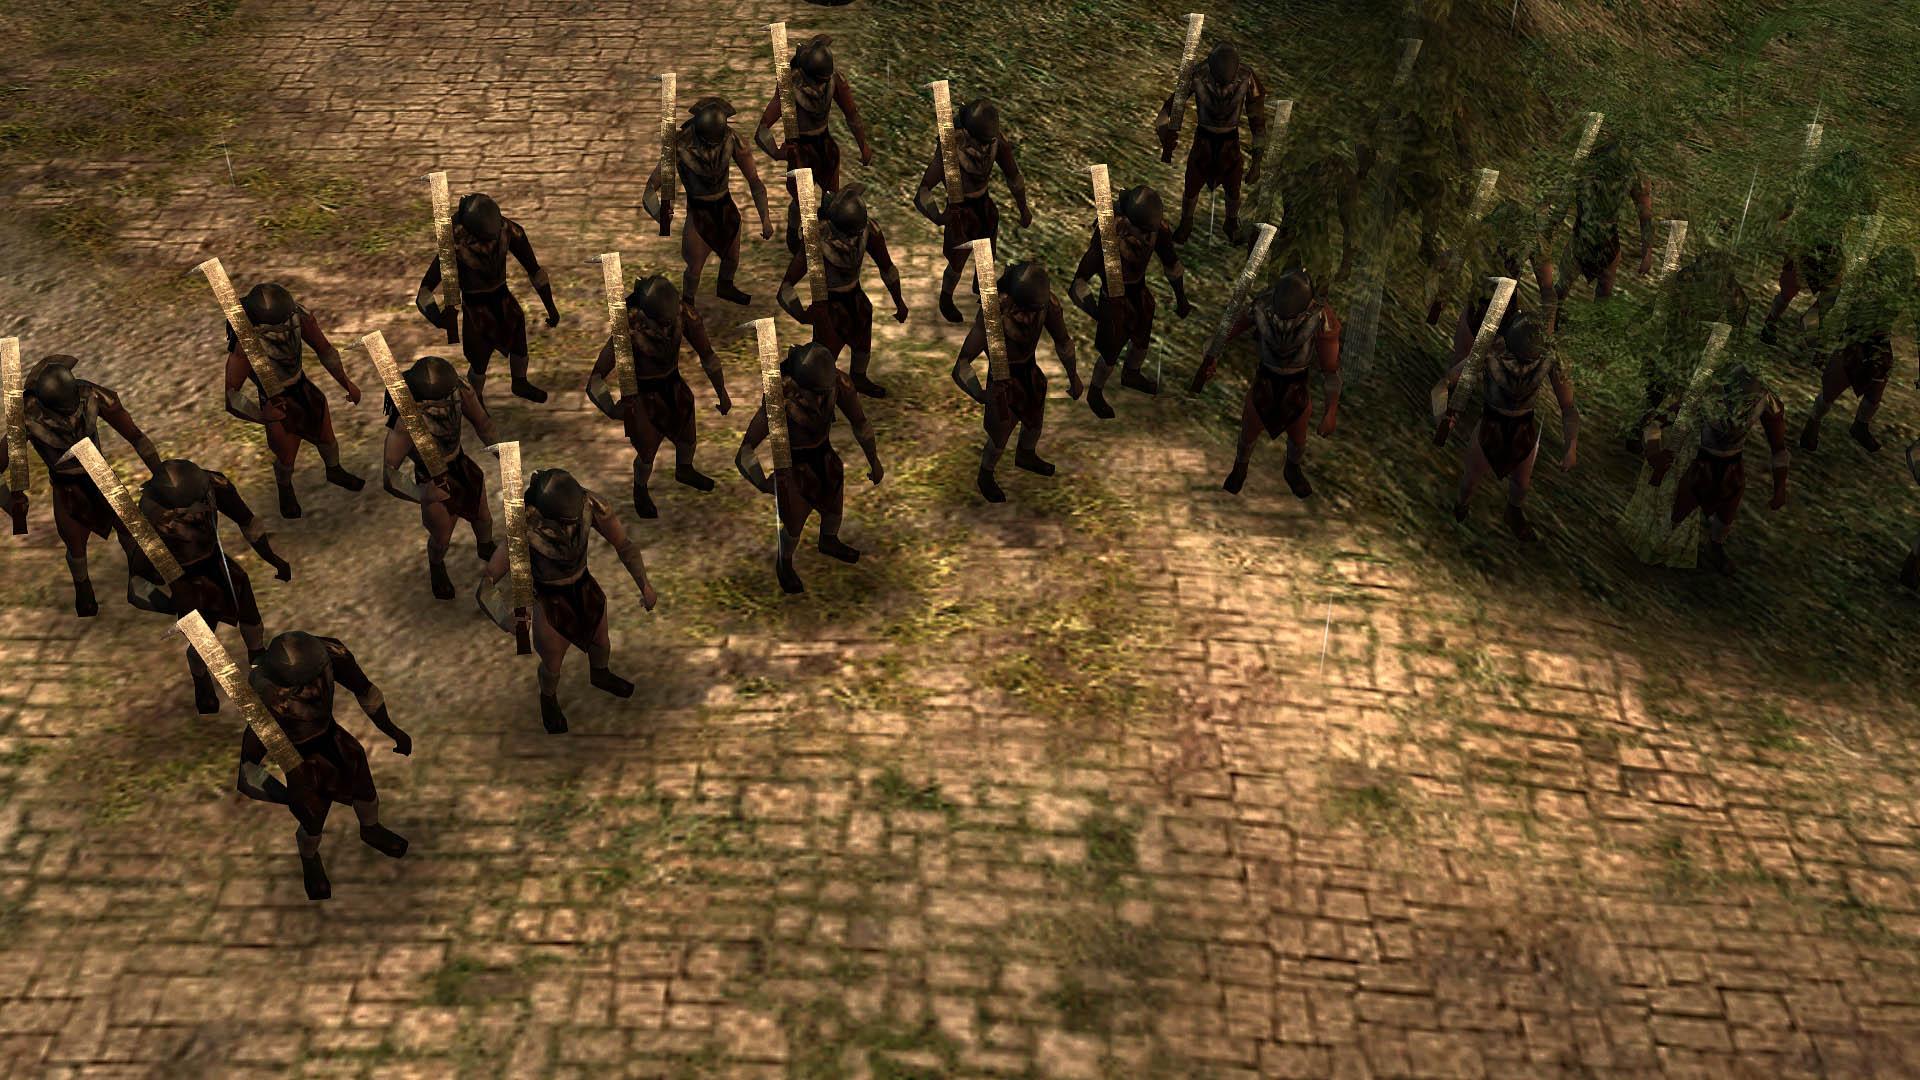 Uruk Hai Image Of Shadow Mod For Battle For Middle Earth